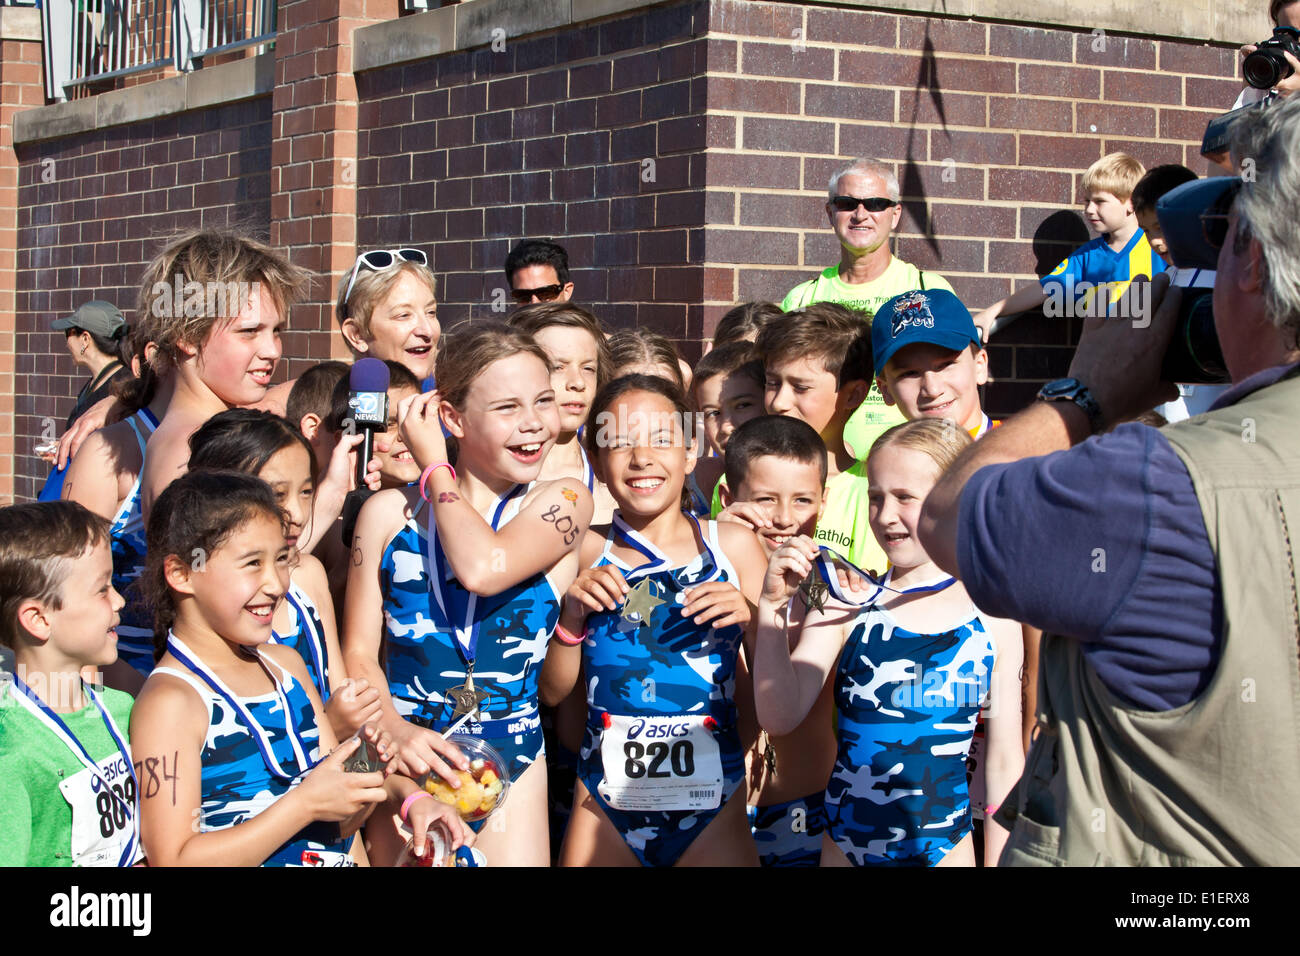 Arlington, Virginia, USA. 1st June 2014. The children who completed the Arlington Triathlon Club's first youth triathlon in Arlington, VA get their moment in the spotlight. The event was part of the Arlington Youth Multisport Festival Stock Photo